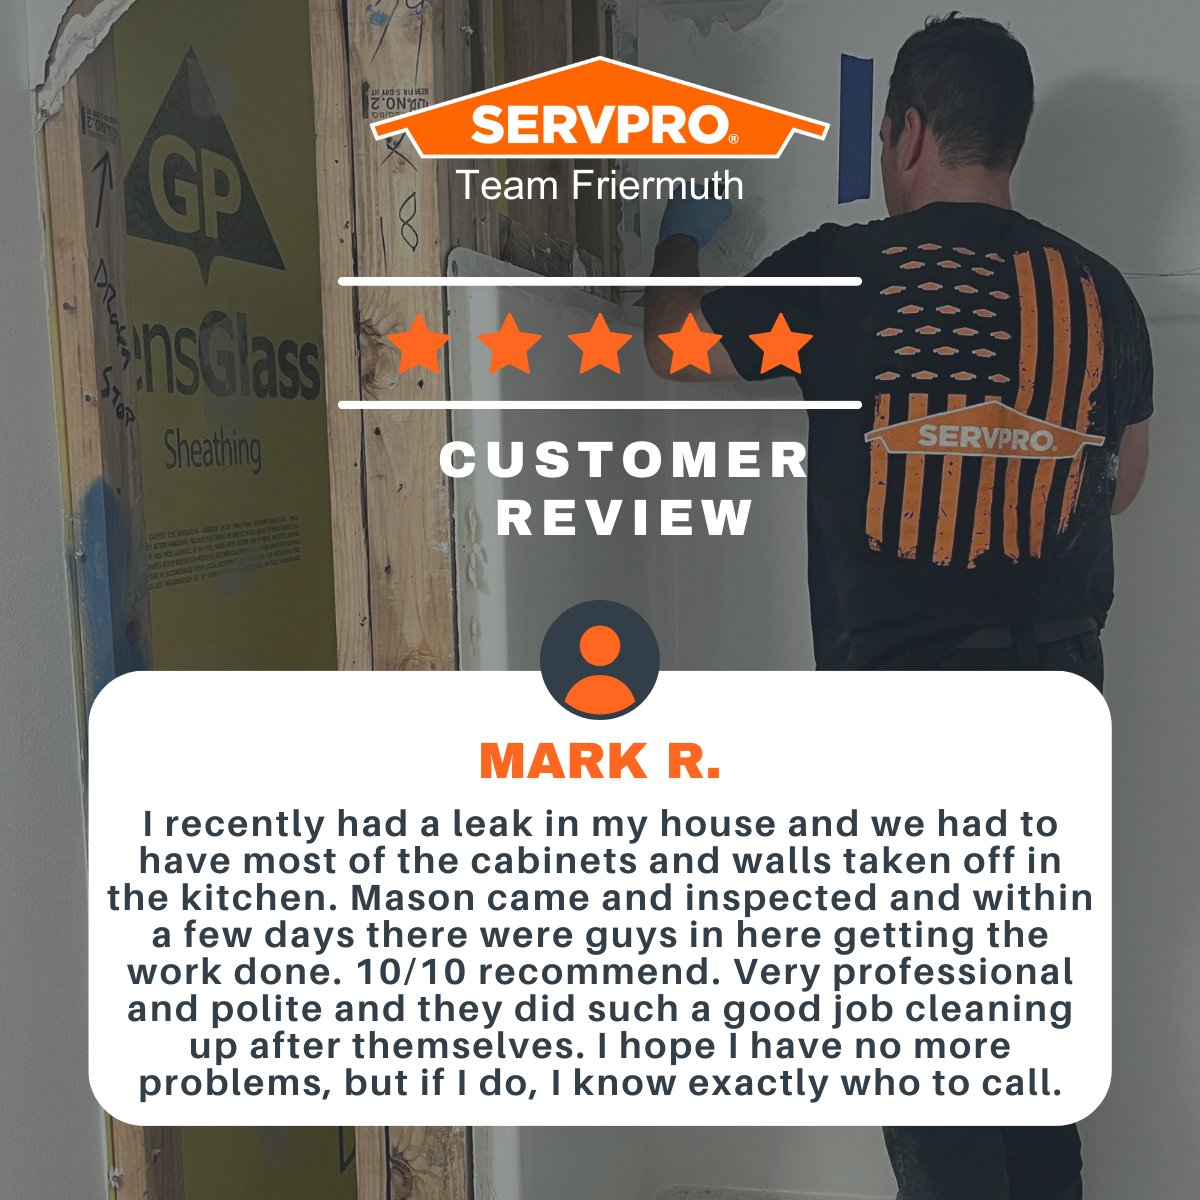 ⭐⭐⭐⭐⭐ Thank you for trusting #SERVPROTeamFriermuth for your restoration needs. When you experience a loss, count on #servpro to deliver professional and reliable service every time. Your satisfaction is our top priority! #RestorationExperts #CustomerSatisfaction